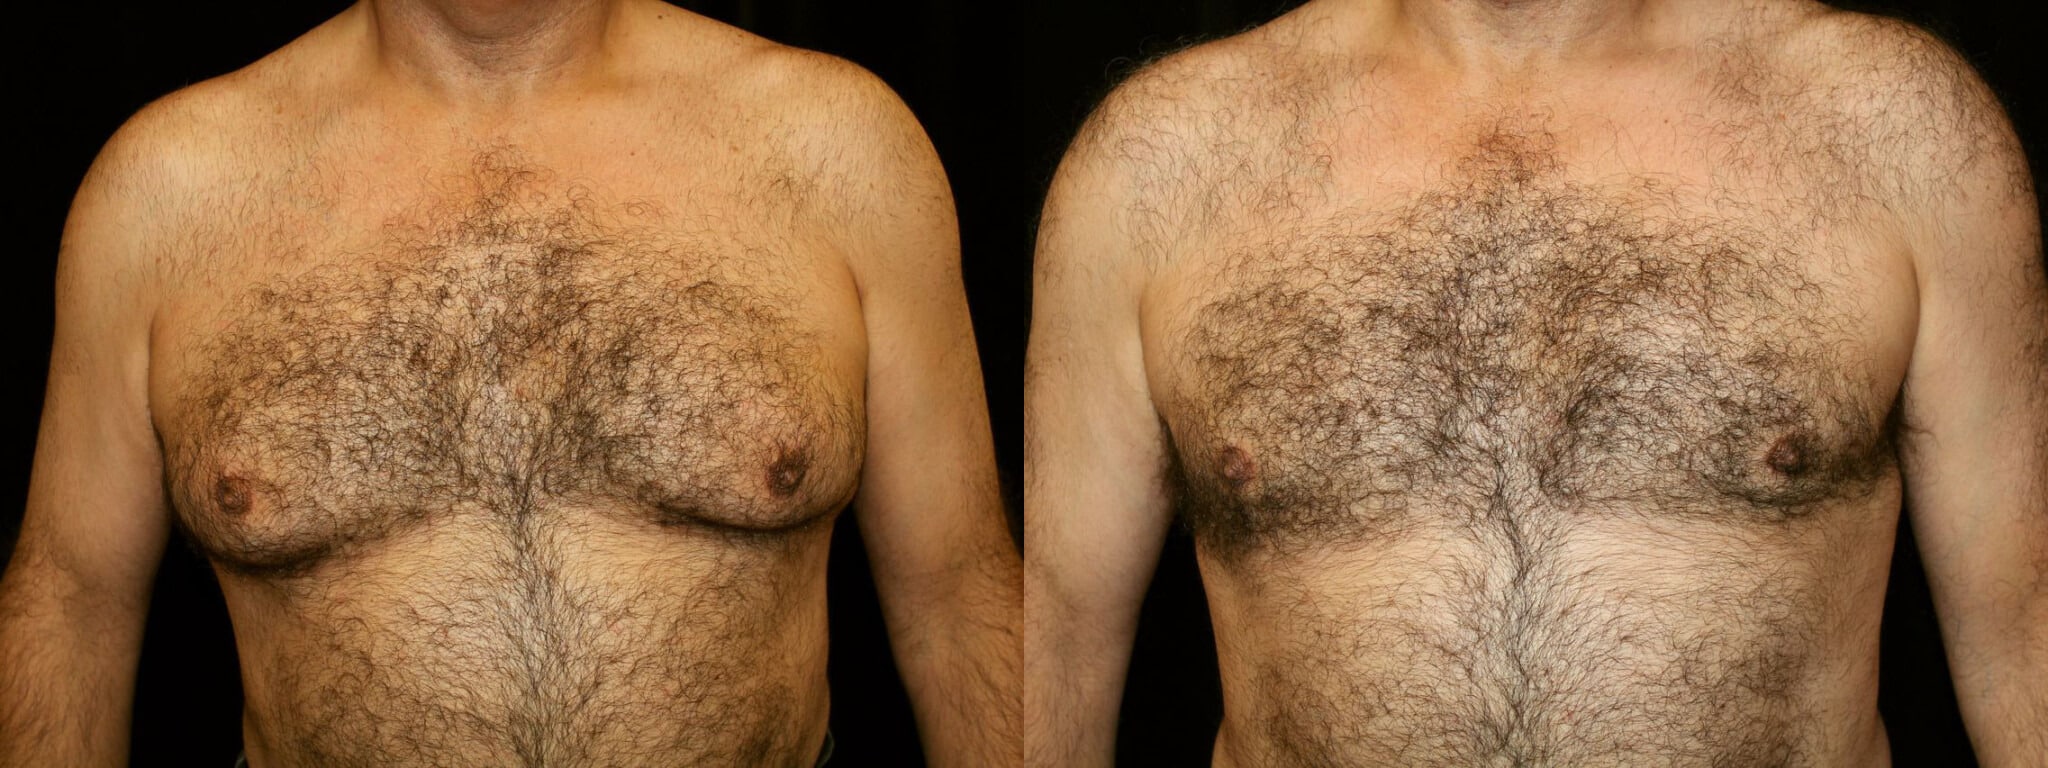 Gynecomastia Patient 5 Before & After